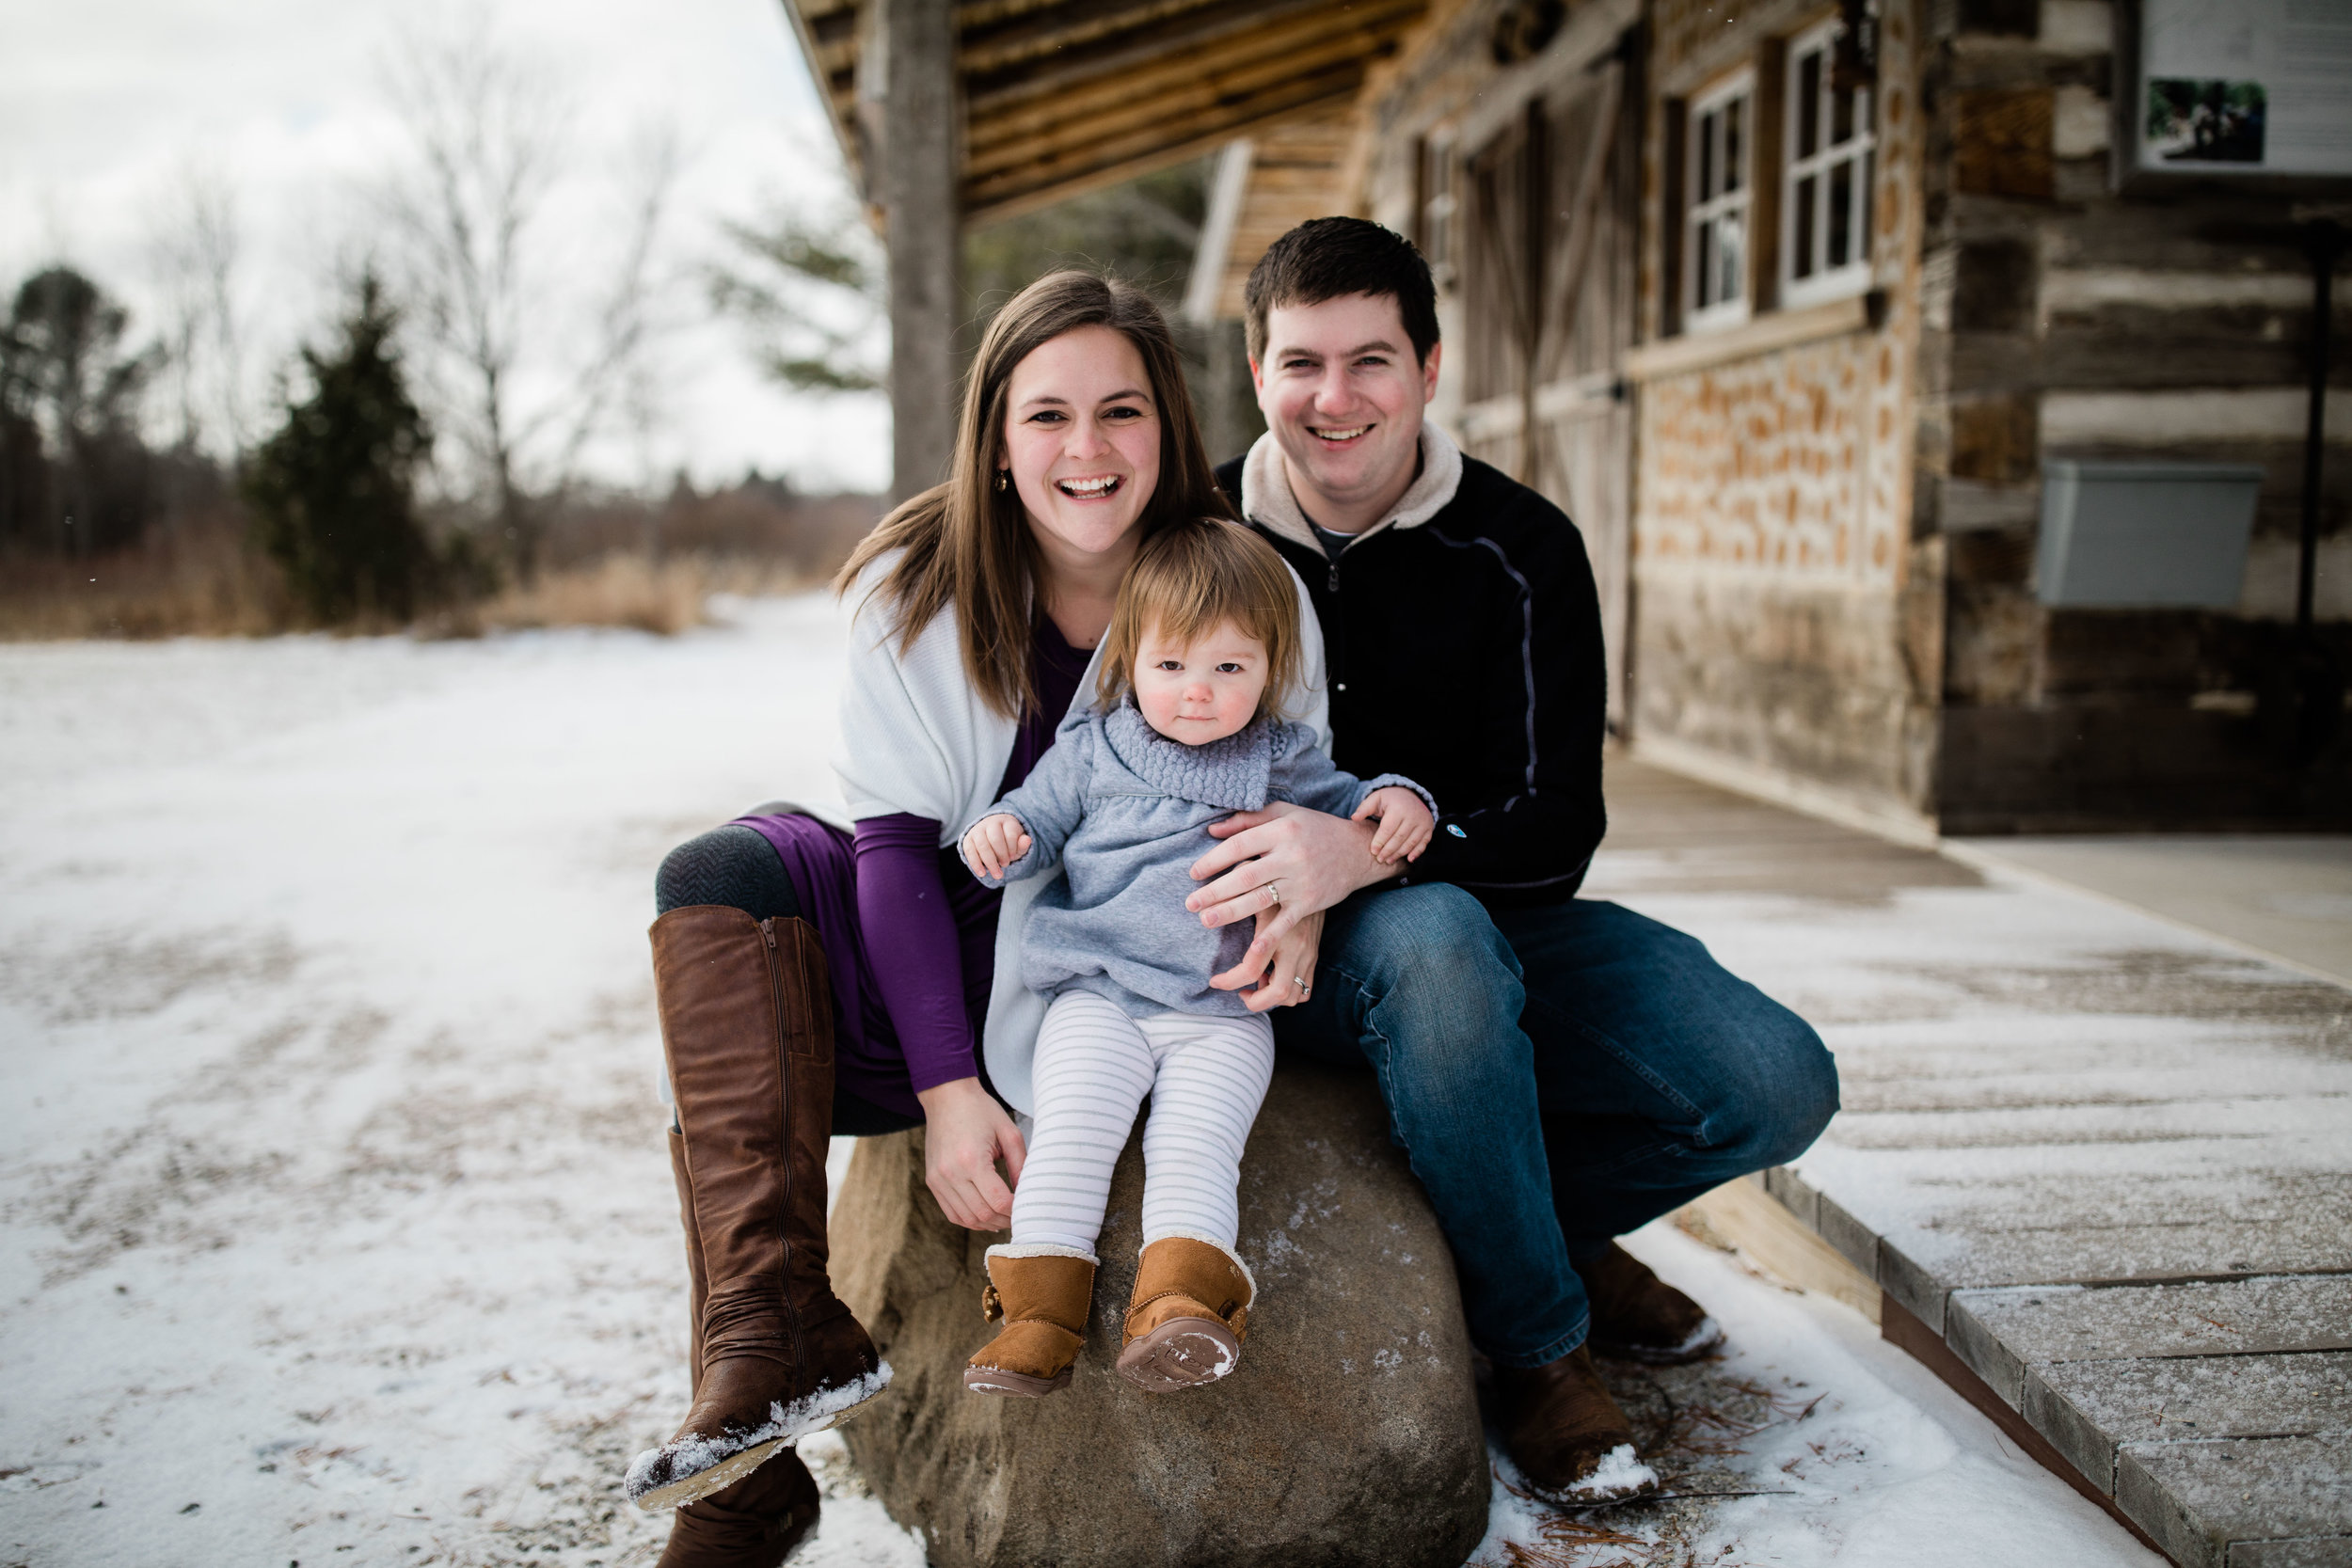 Door County Winter Veal Family Photography Session in Sturgeon Bay, WI